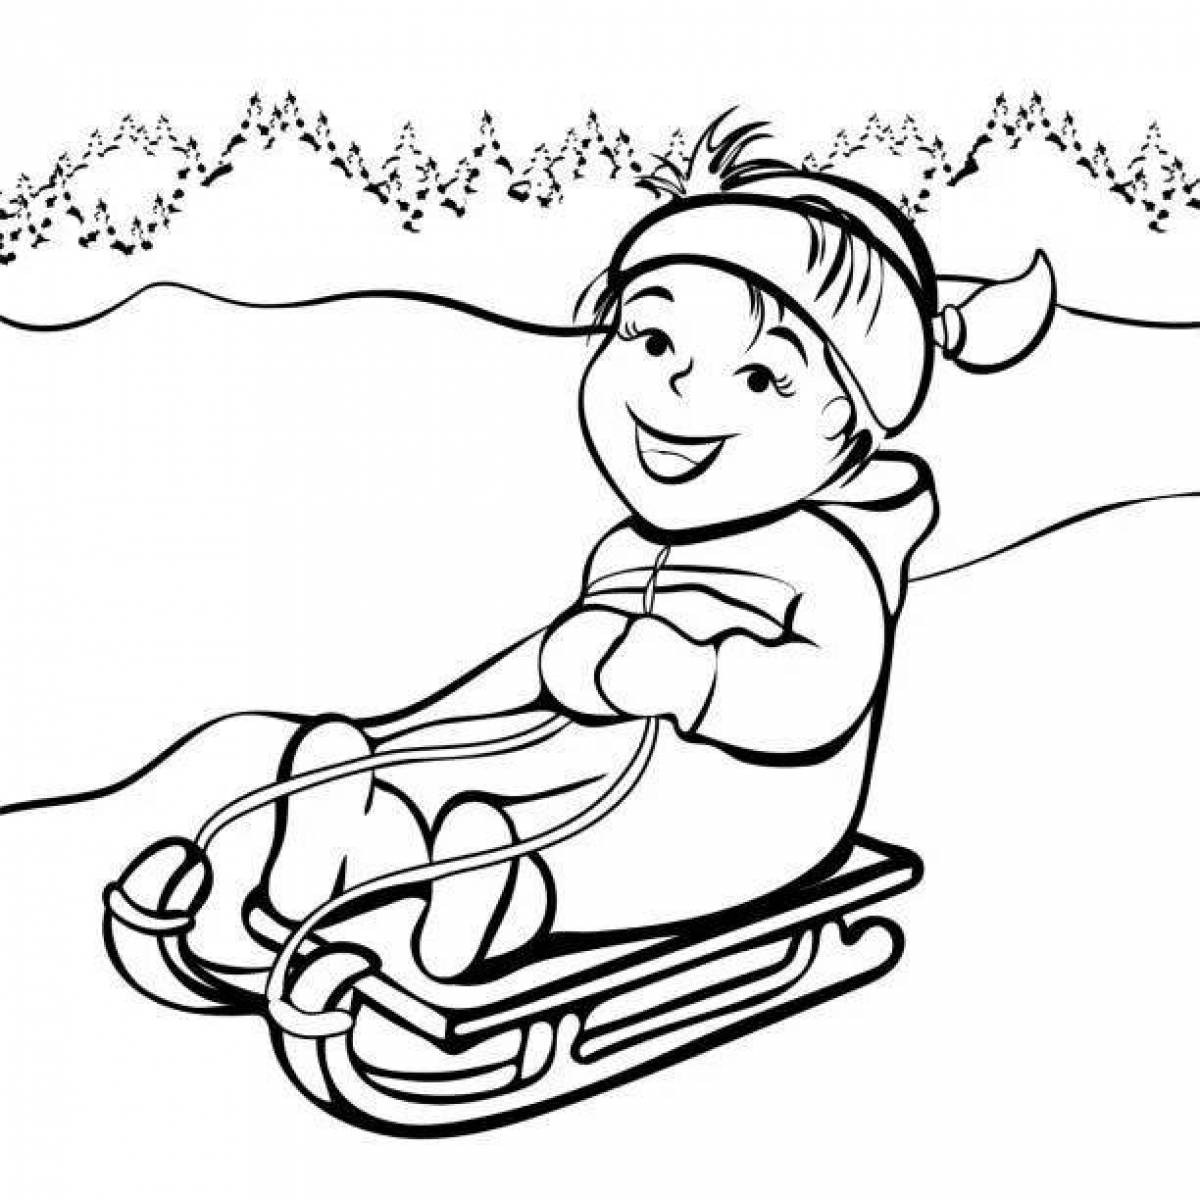 Coloring for children on a sled